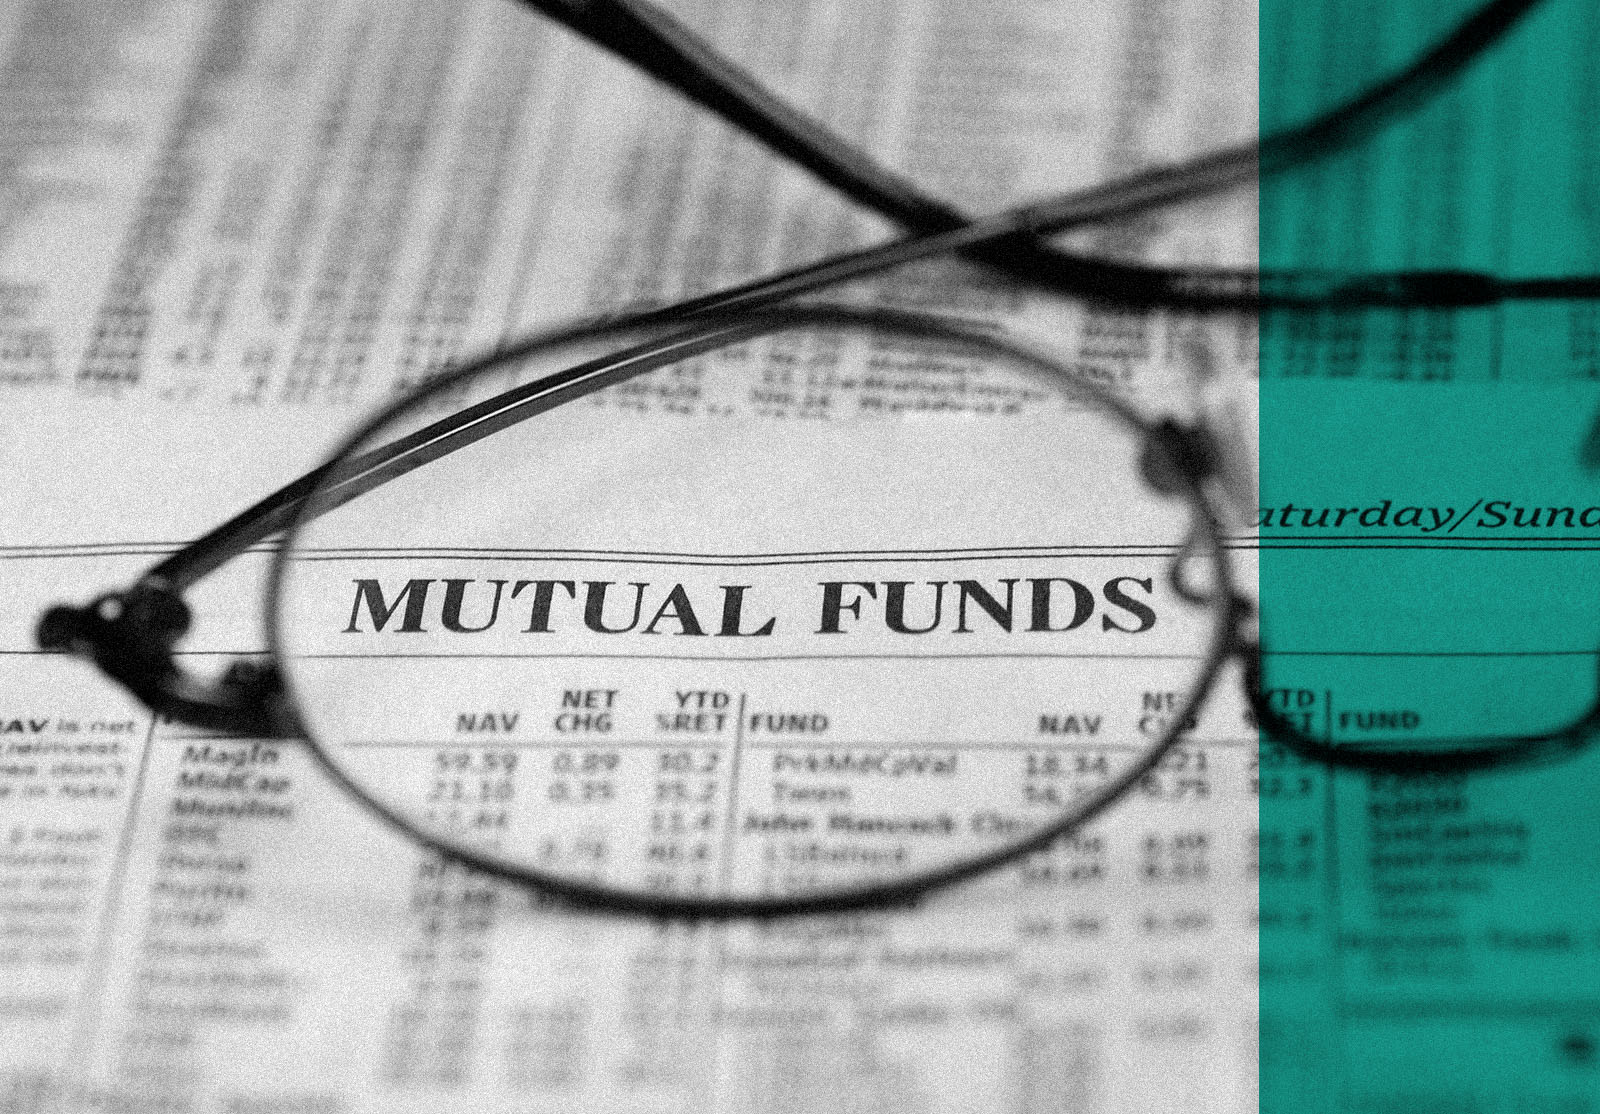 Focus on mutual fund investing